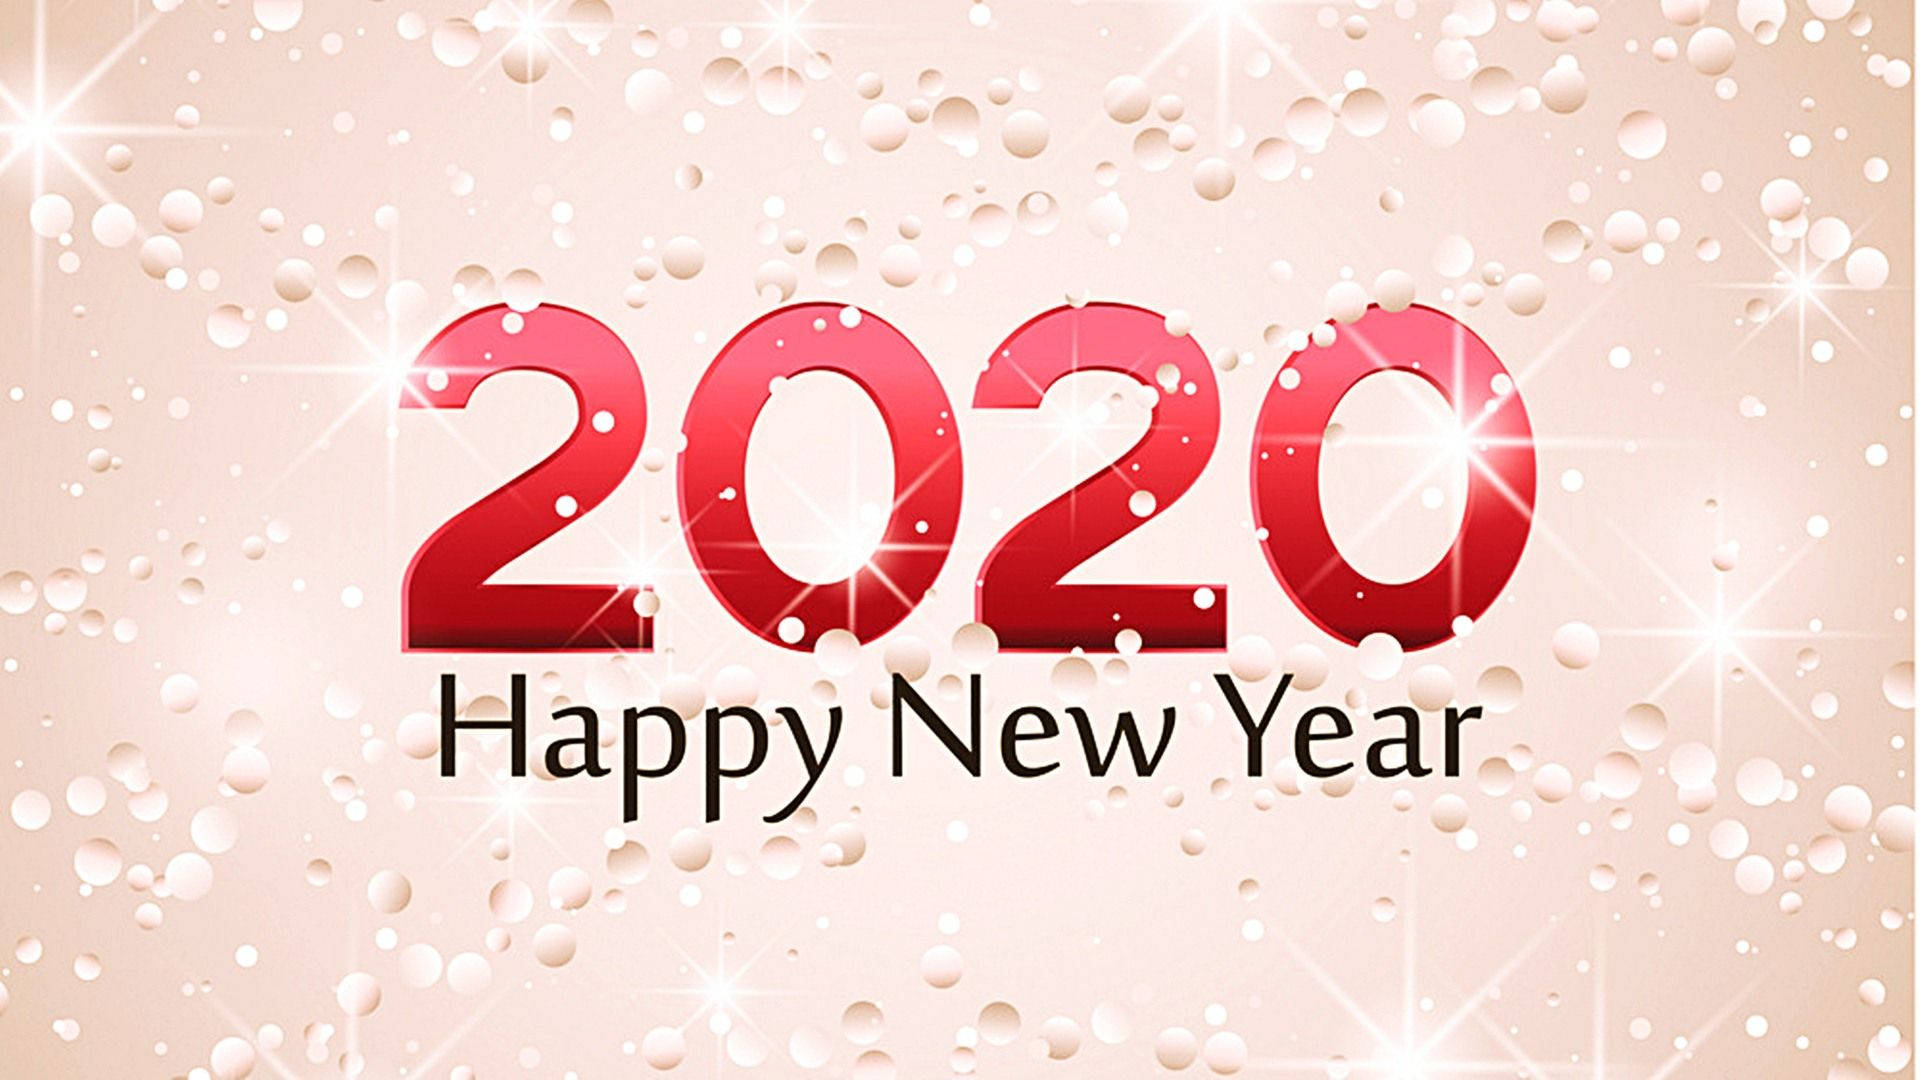 Celebrate The New Year 2020 With Warmth Wallpaper